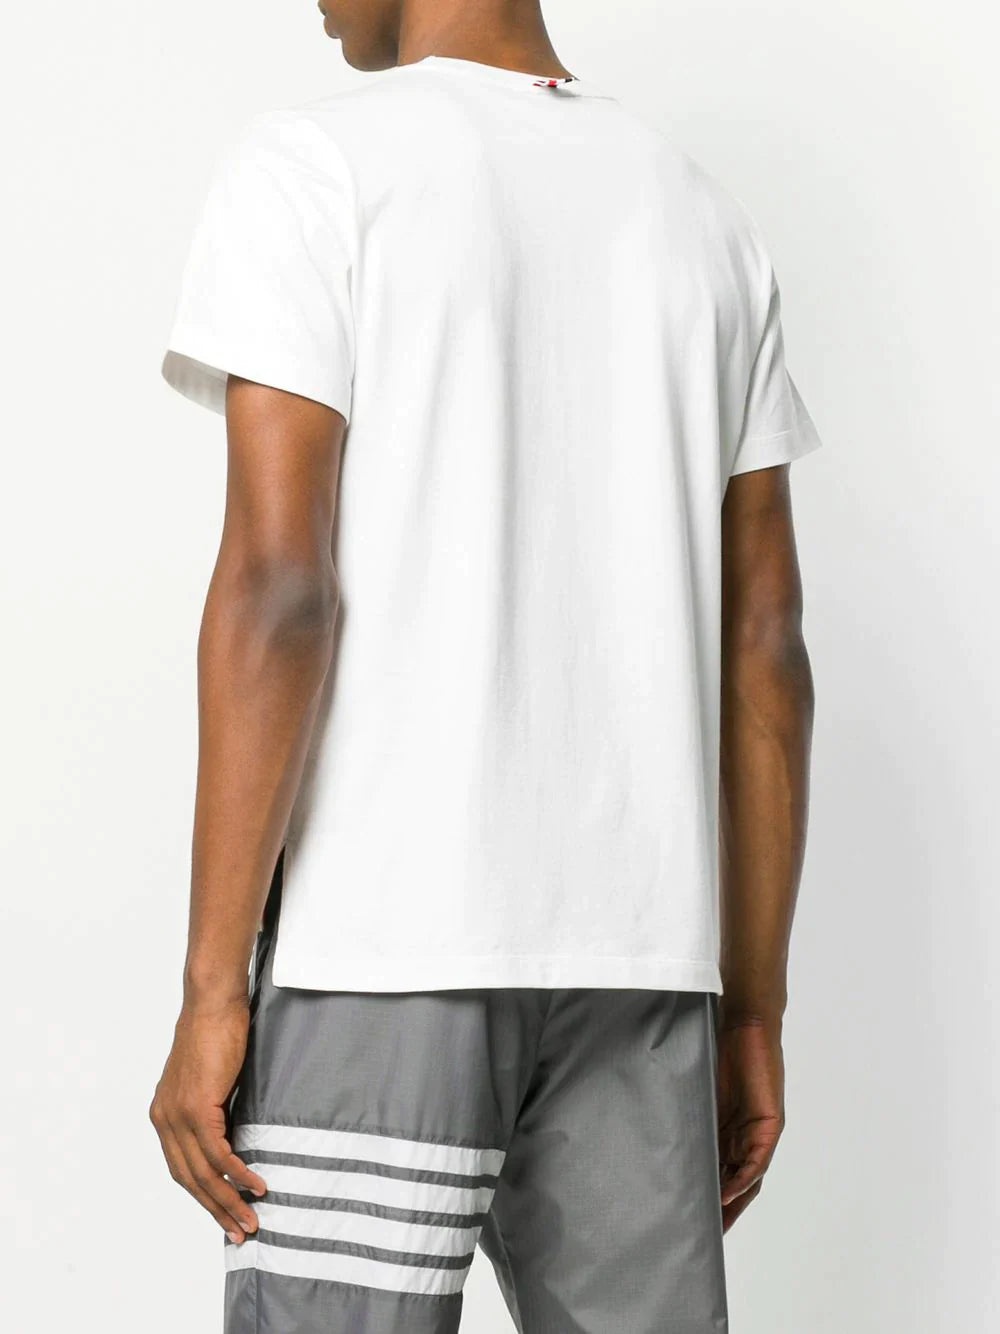 Relaxed Fit Short Sleeve Tee With Side Slit - 4